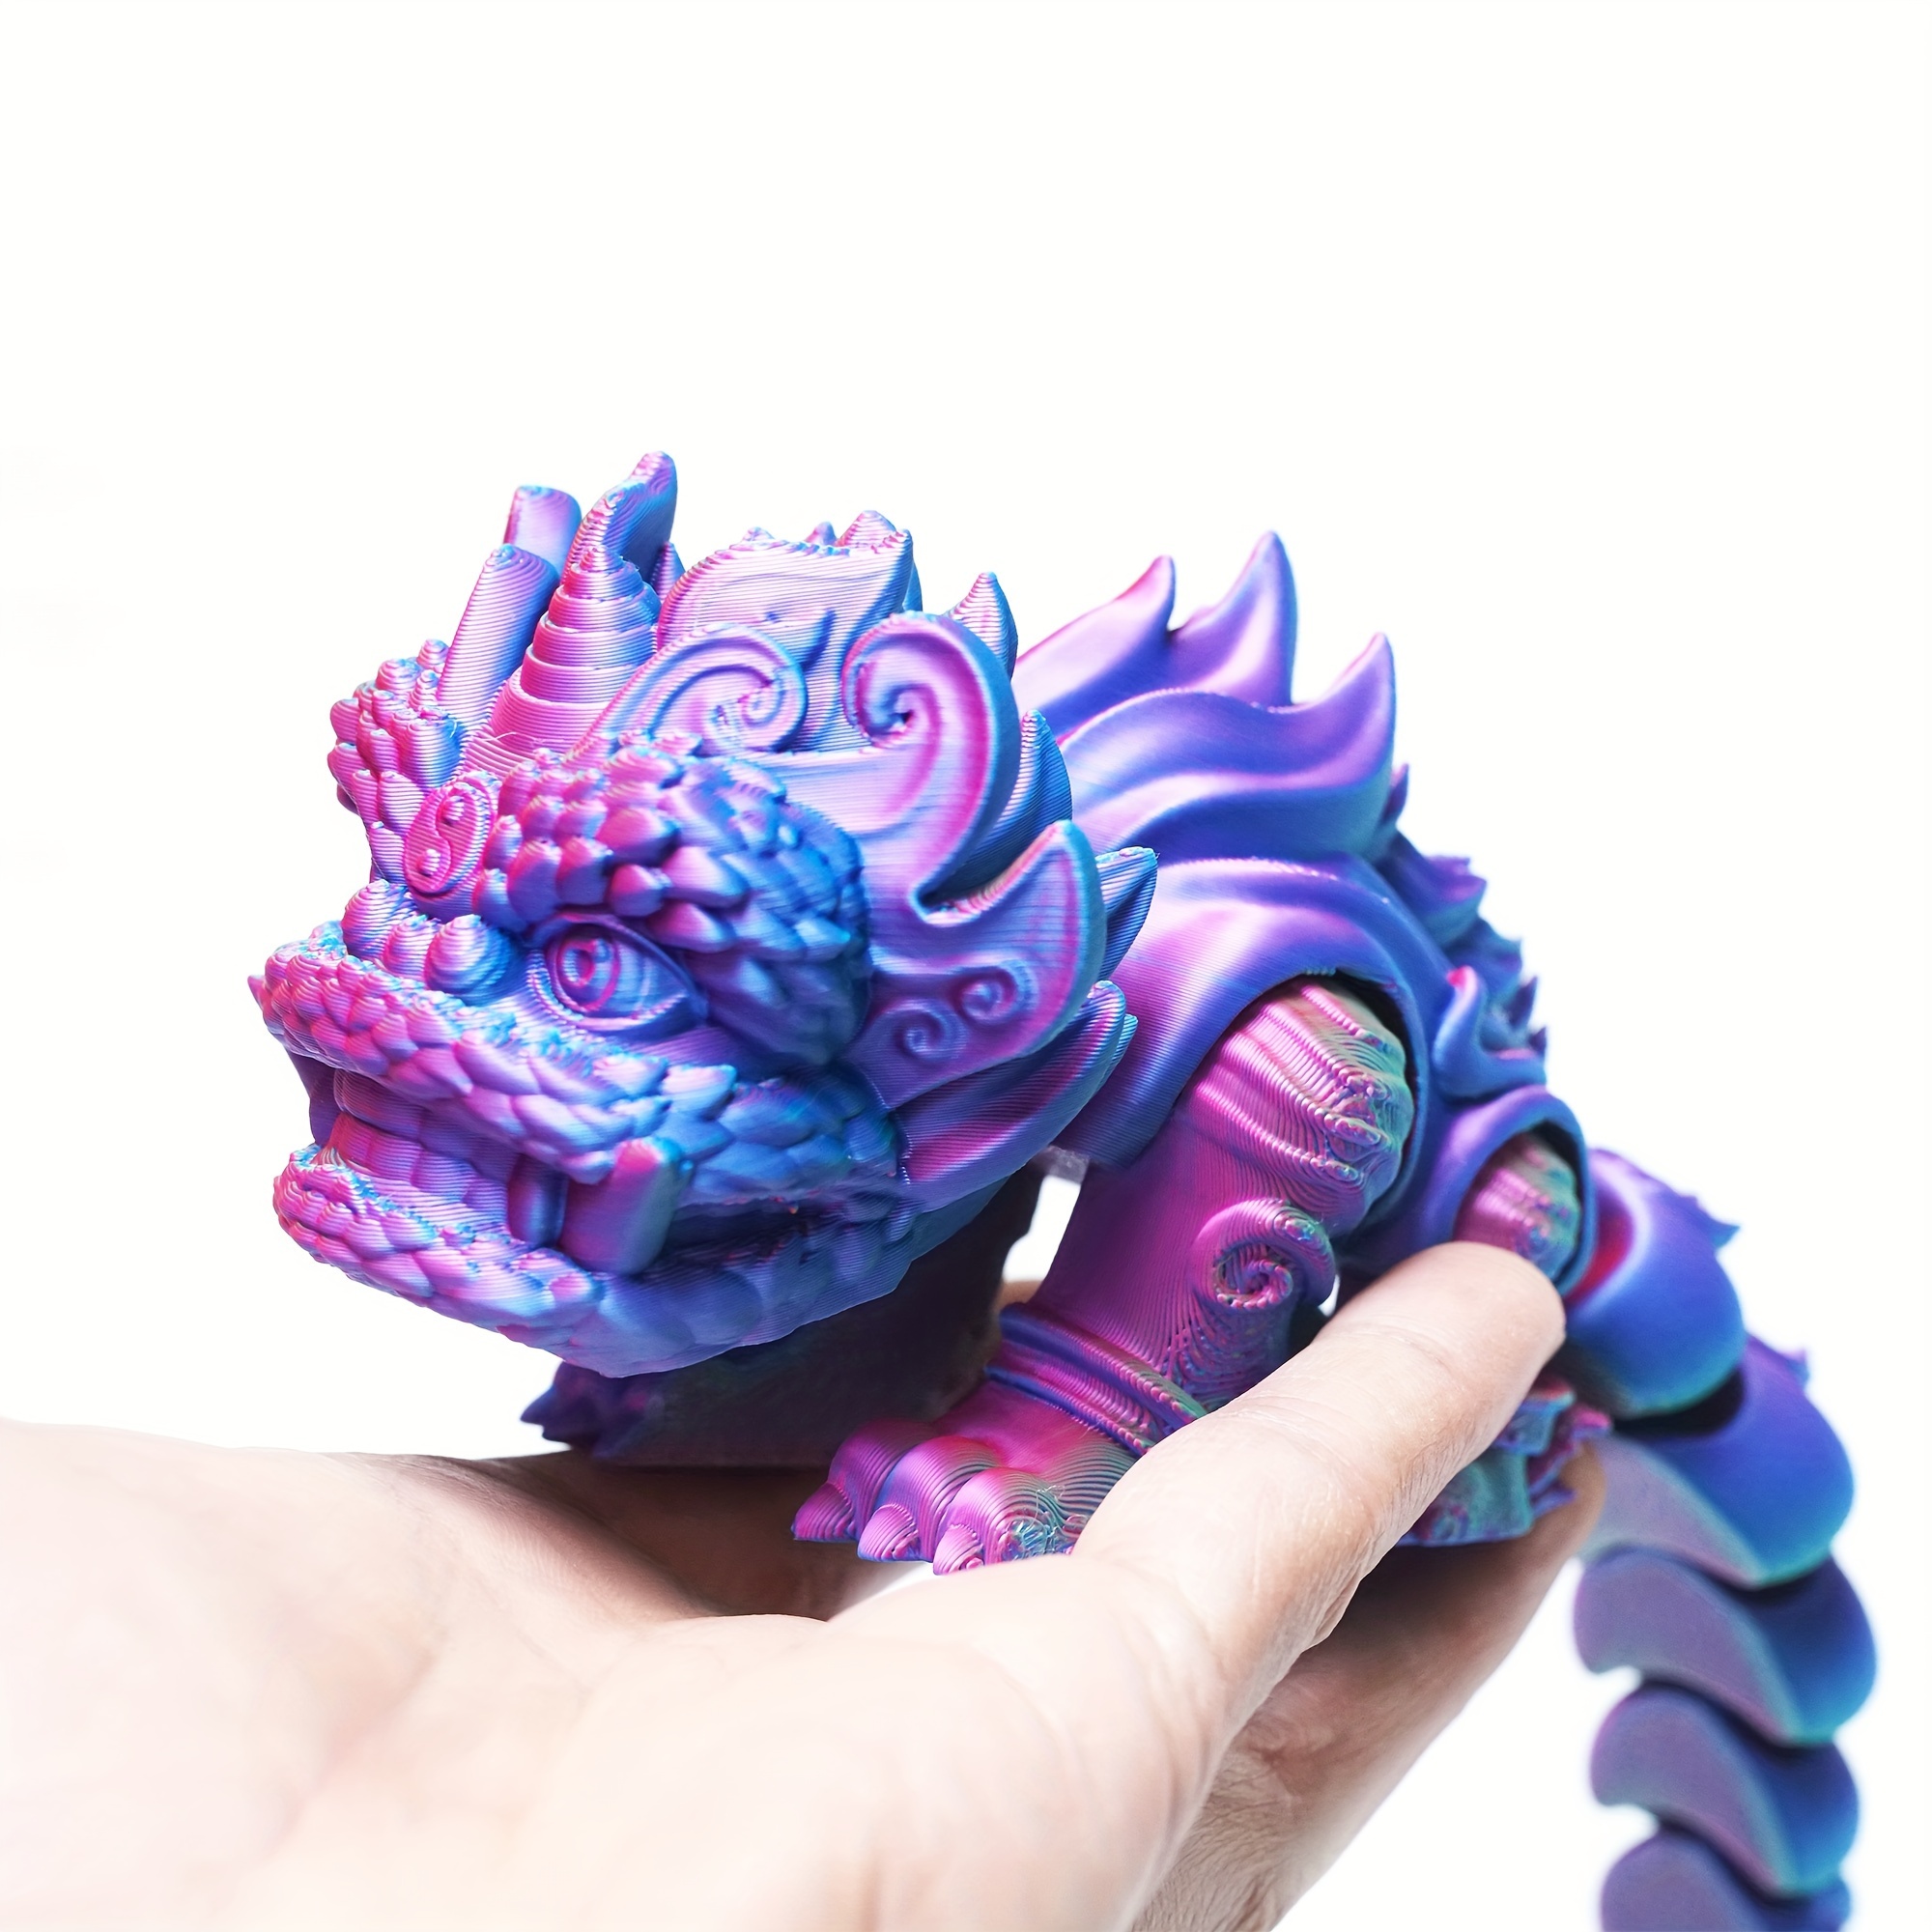 1pc 3d printed articulated chinese guardian lion figurine multi joint movable mythical creature ornament creative poseable collectible toy plastic desk ornament home decor room decor